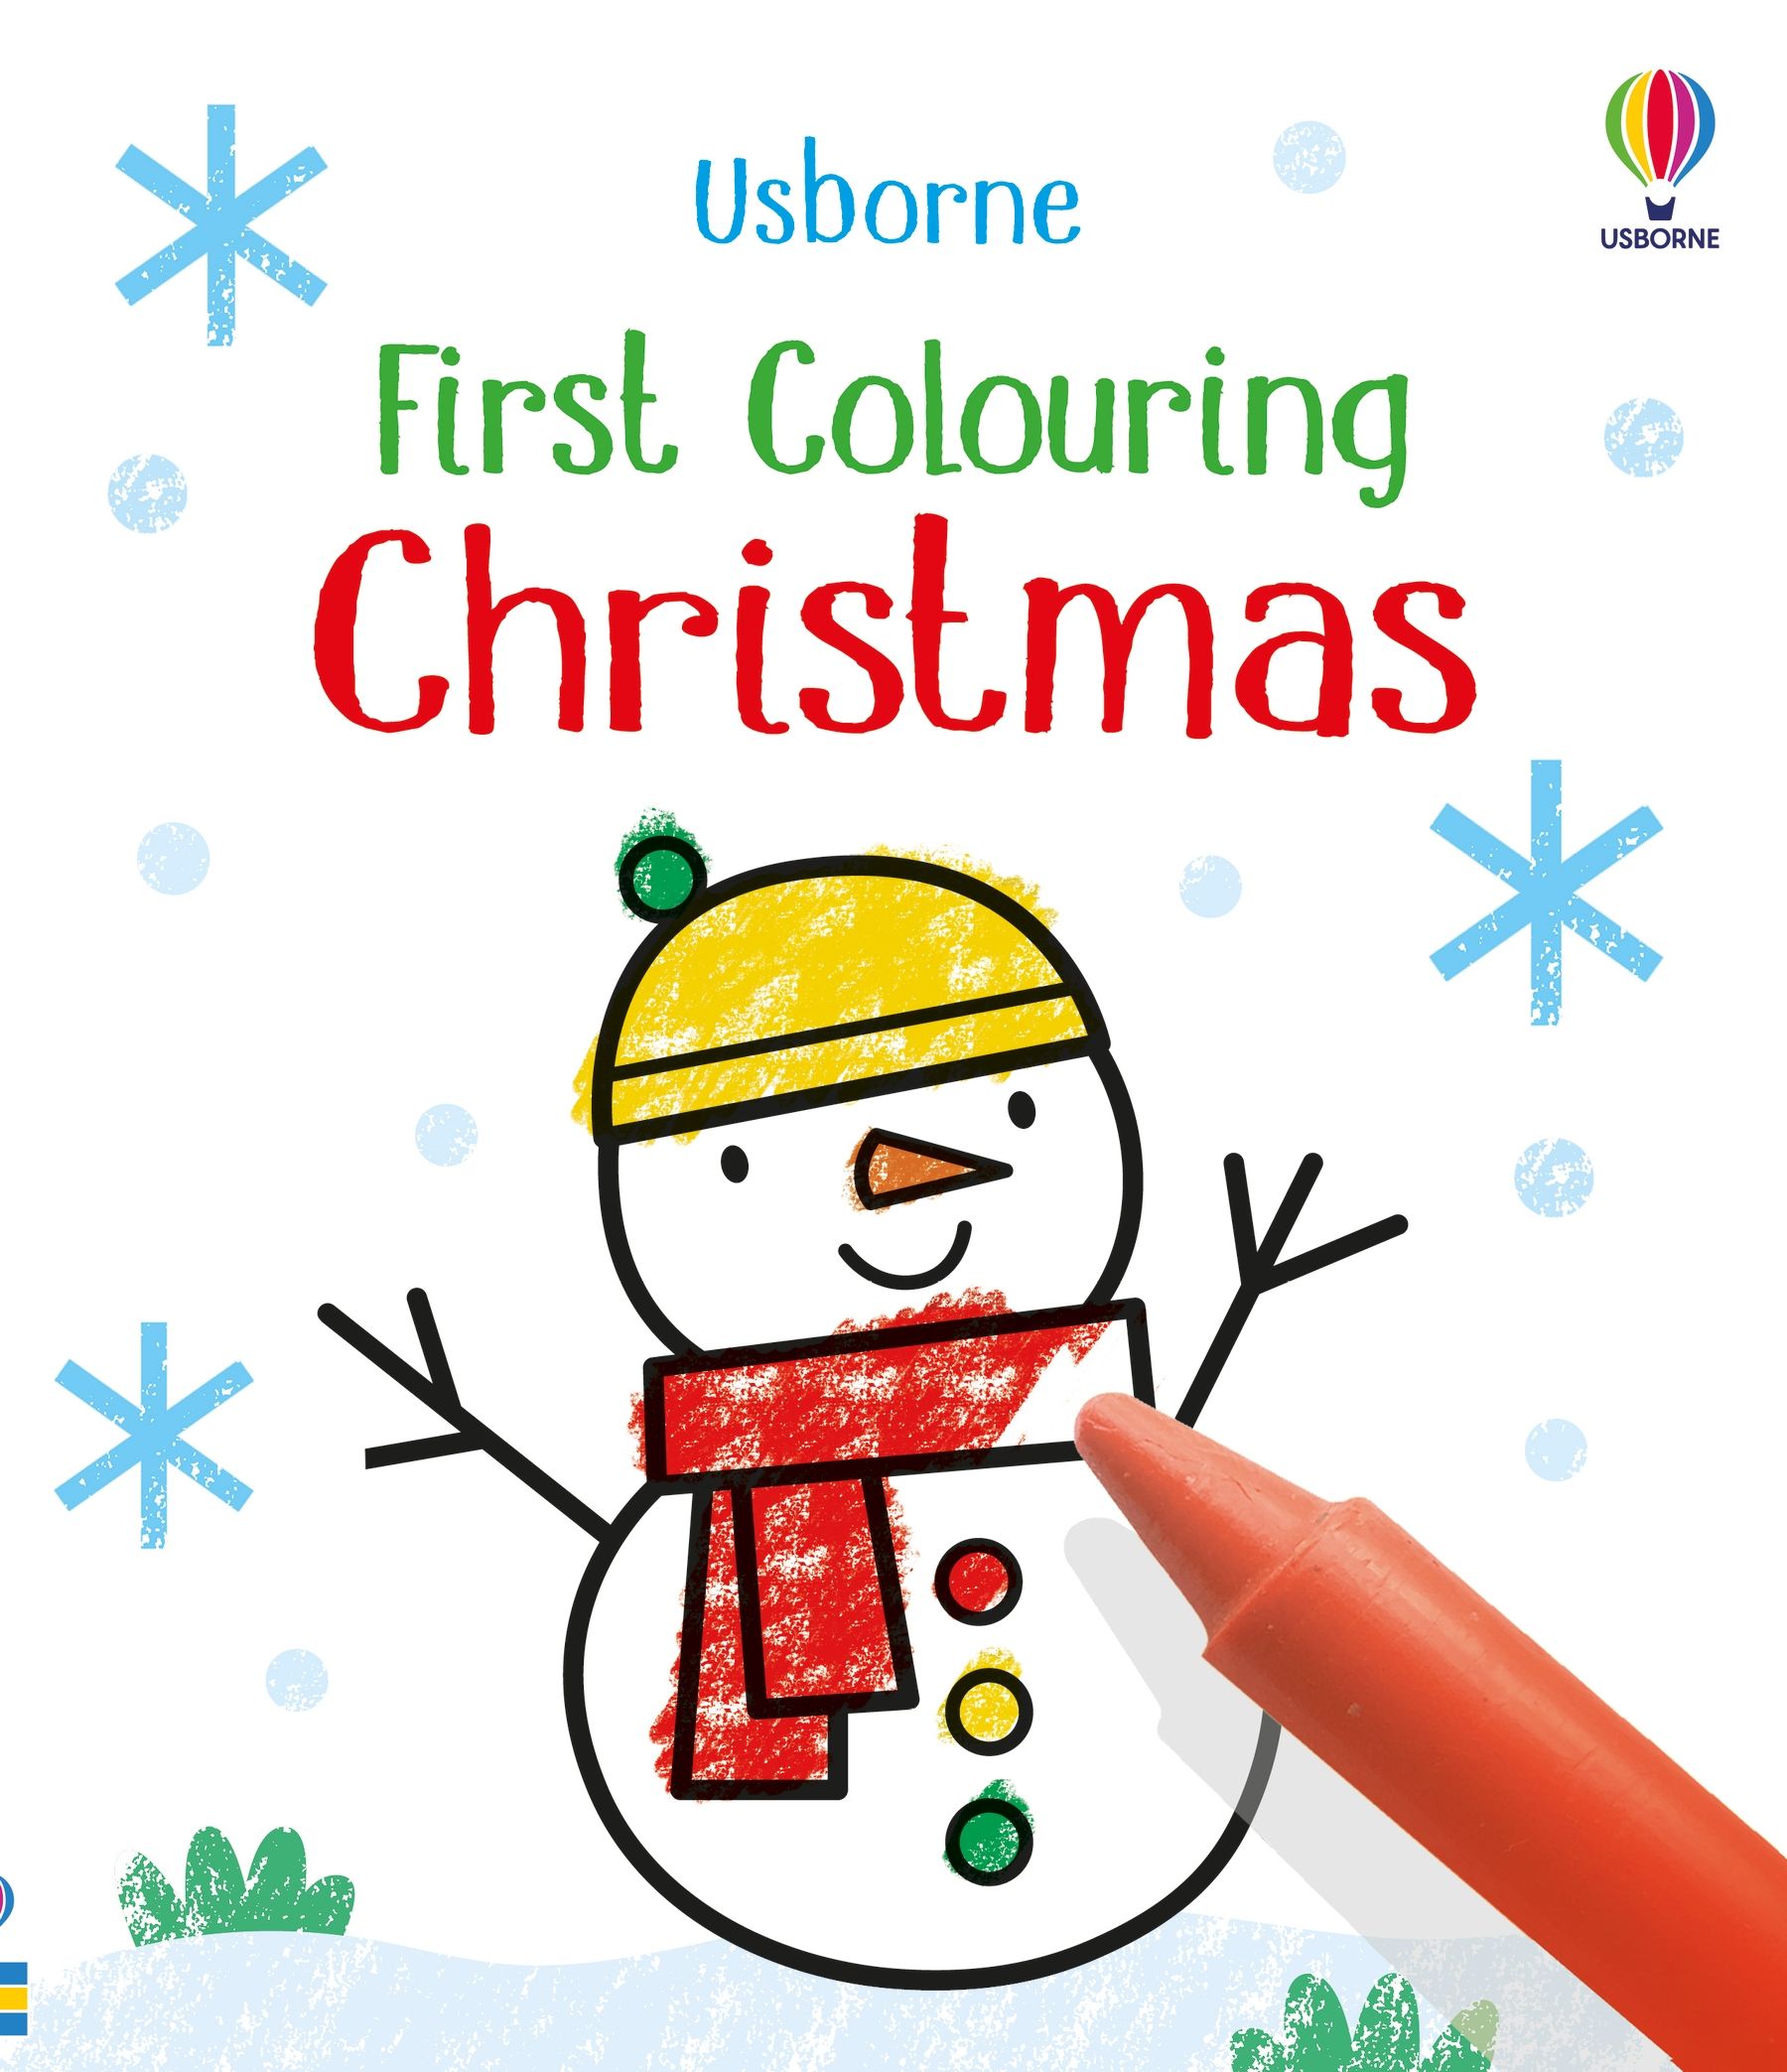 Little Bookworms | Usborne First Colouring Christmas by Weirs of Baggot Street